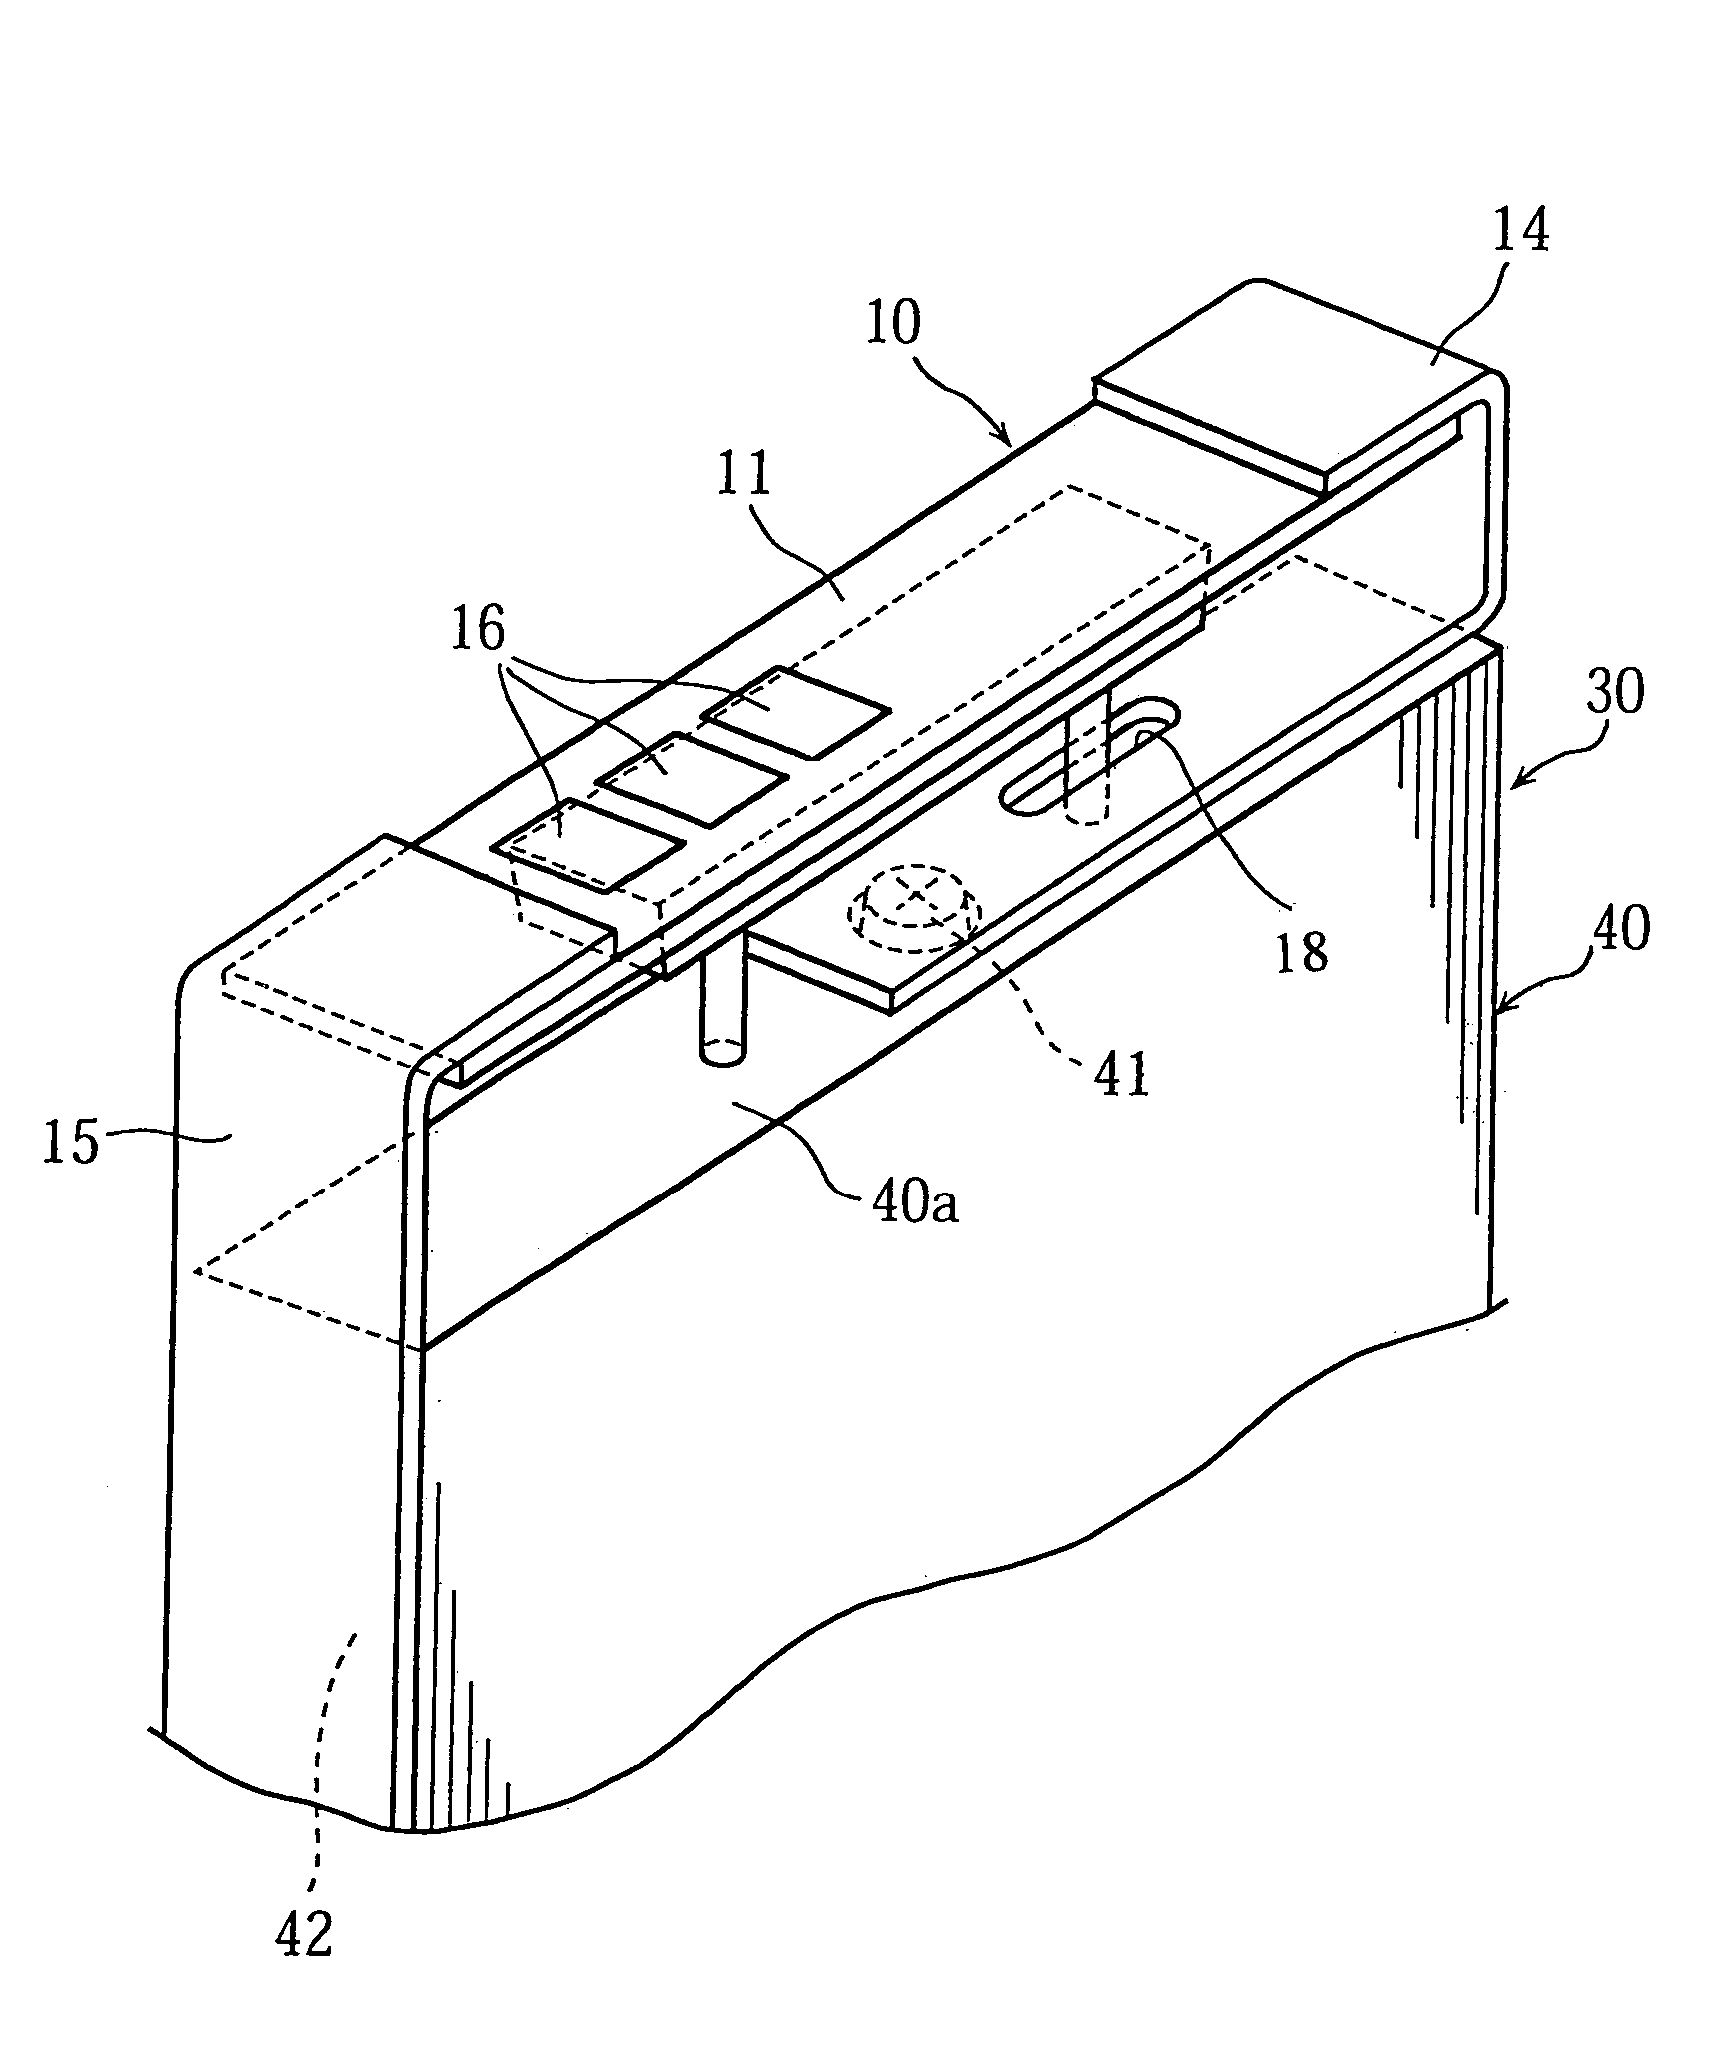 Protection circuit module and battery pack incorporating the same